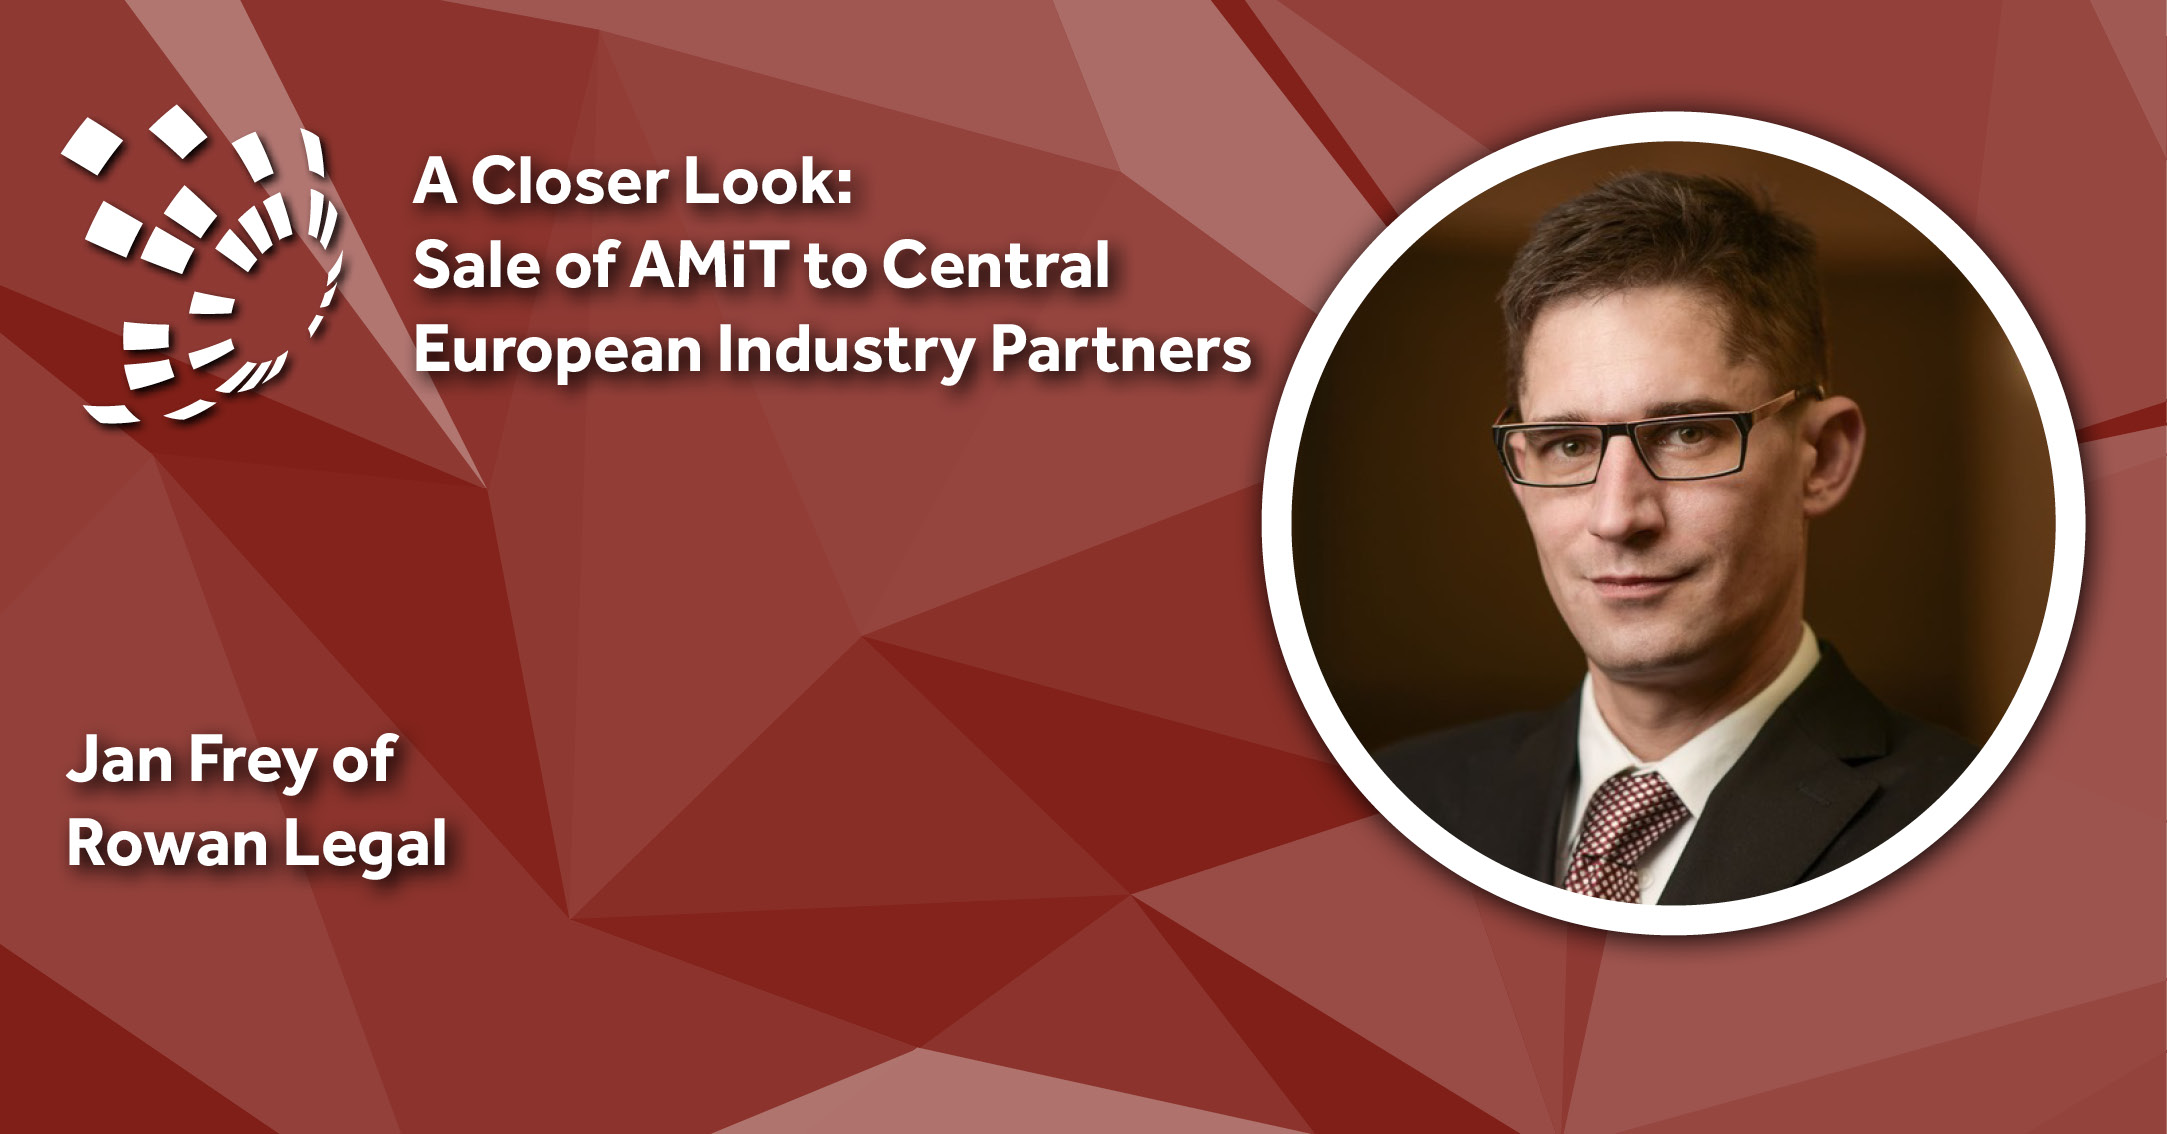 A Closer Look: Rowan Legal's Jan Frey on Sale of AMiT to Central European Industry Partners